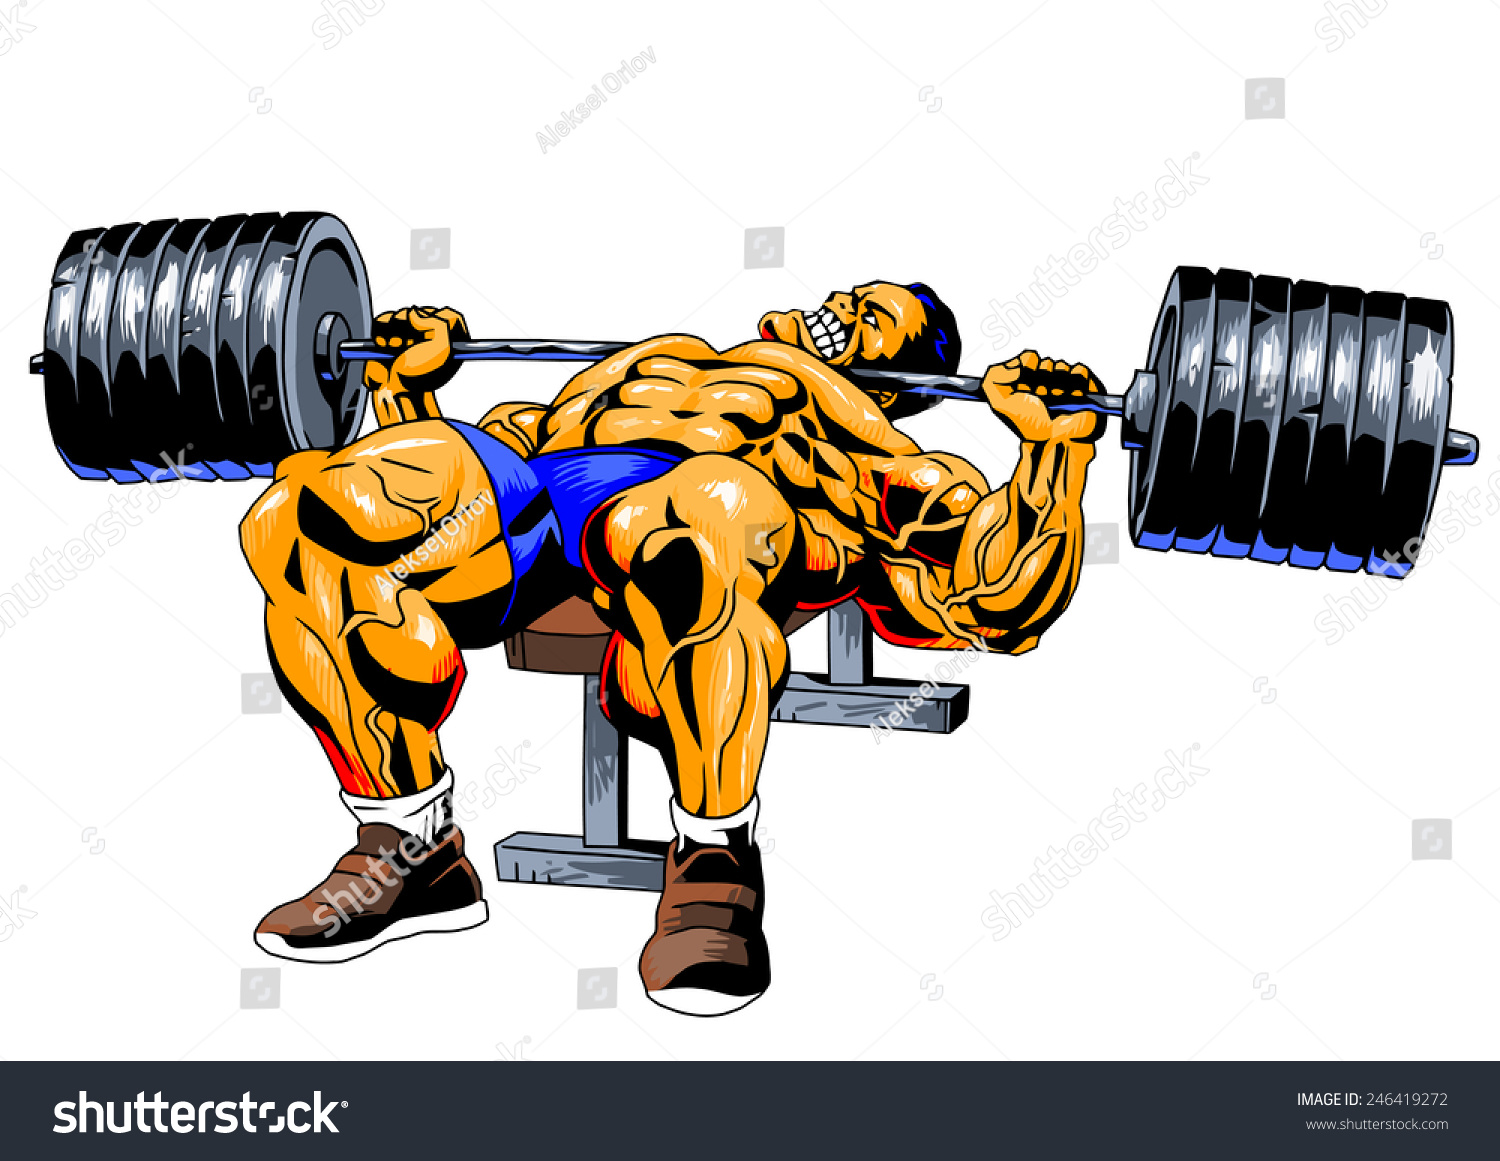 stock-photo-bodybuilder-bench-press-illustration-color-drawing-isolated-on-a-white-246419272.jpg